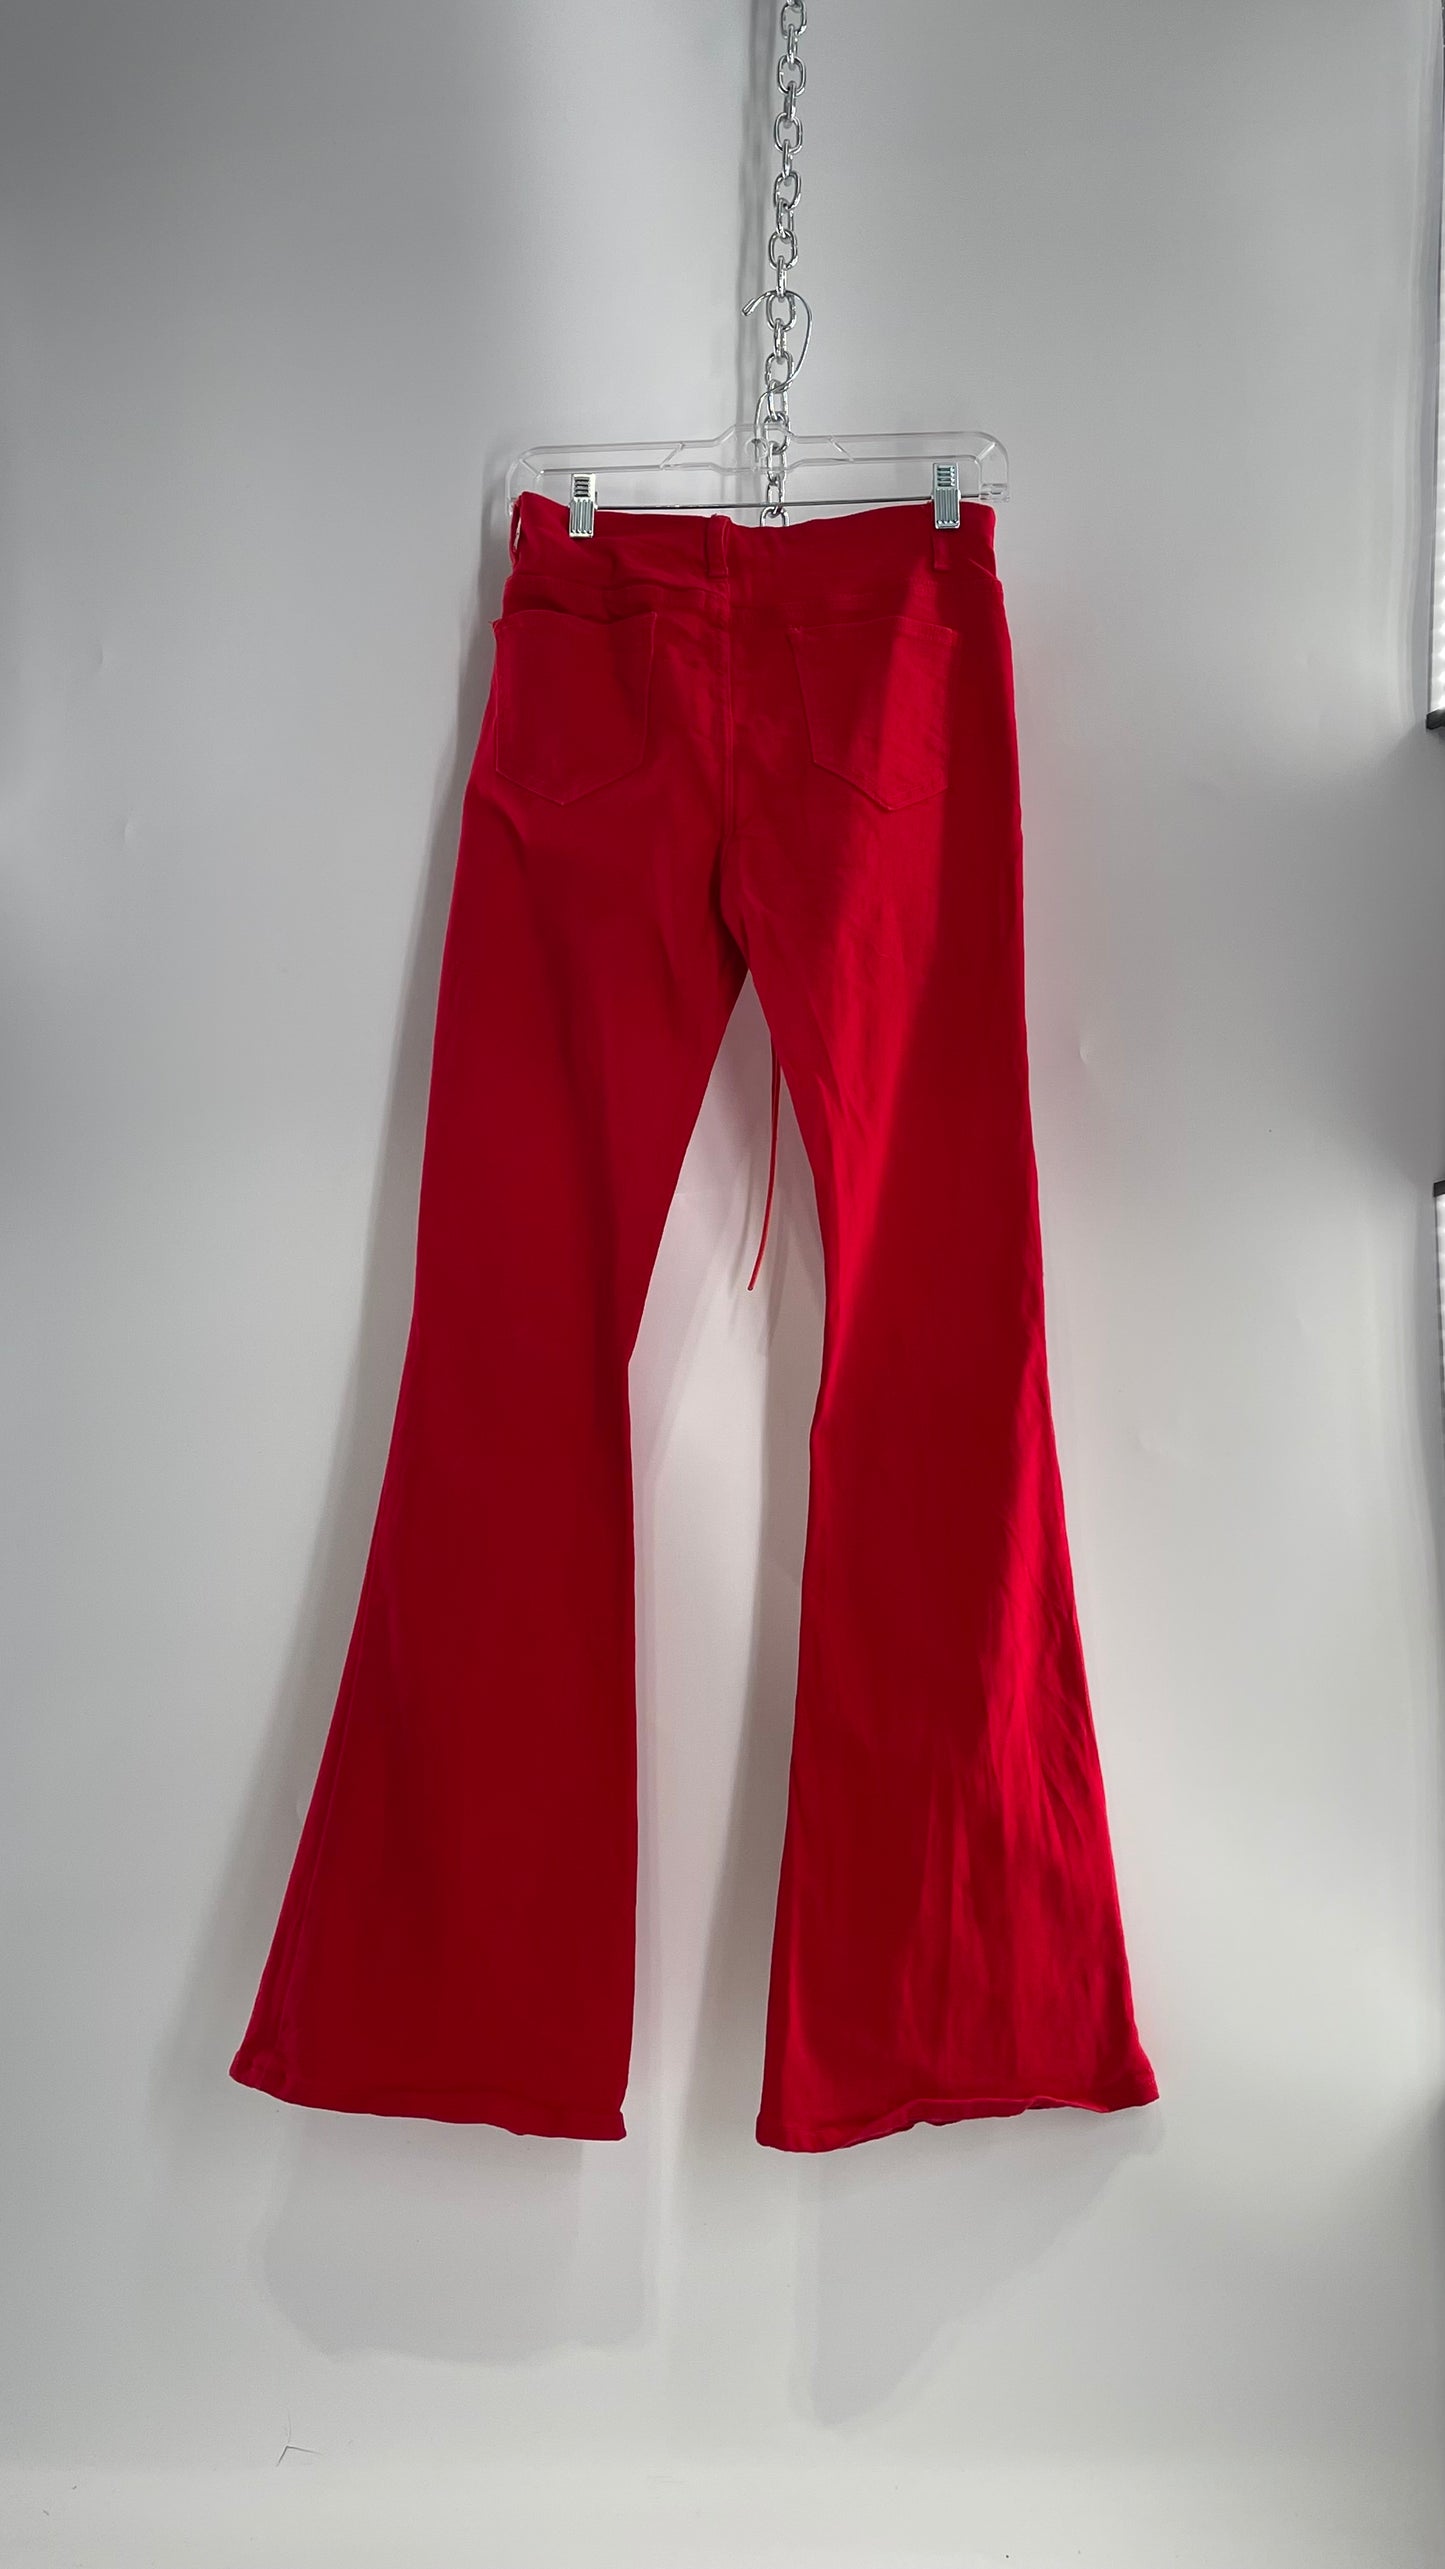 Edikted Rockstar Red Kick Flare Bell Bottoms with Lace Up Thigh and Waistline Detail (Large)